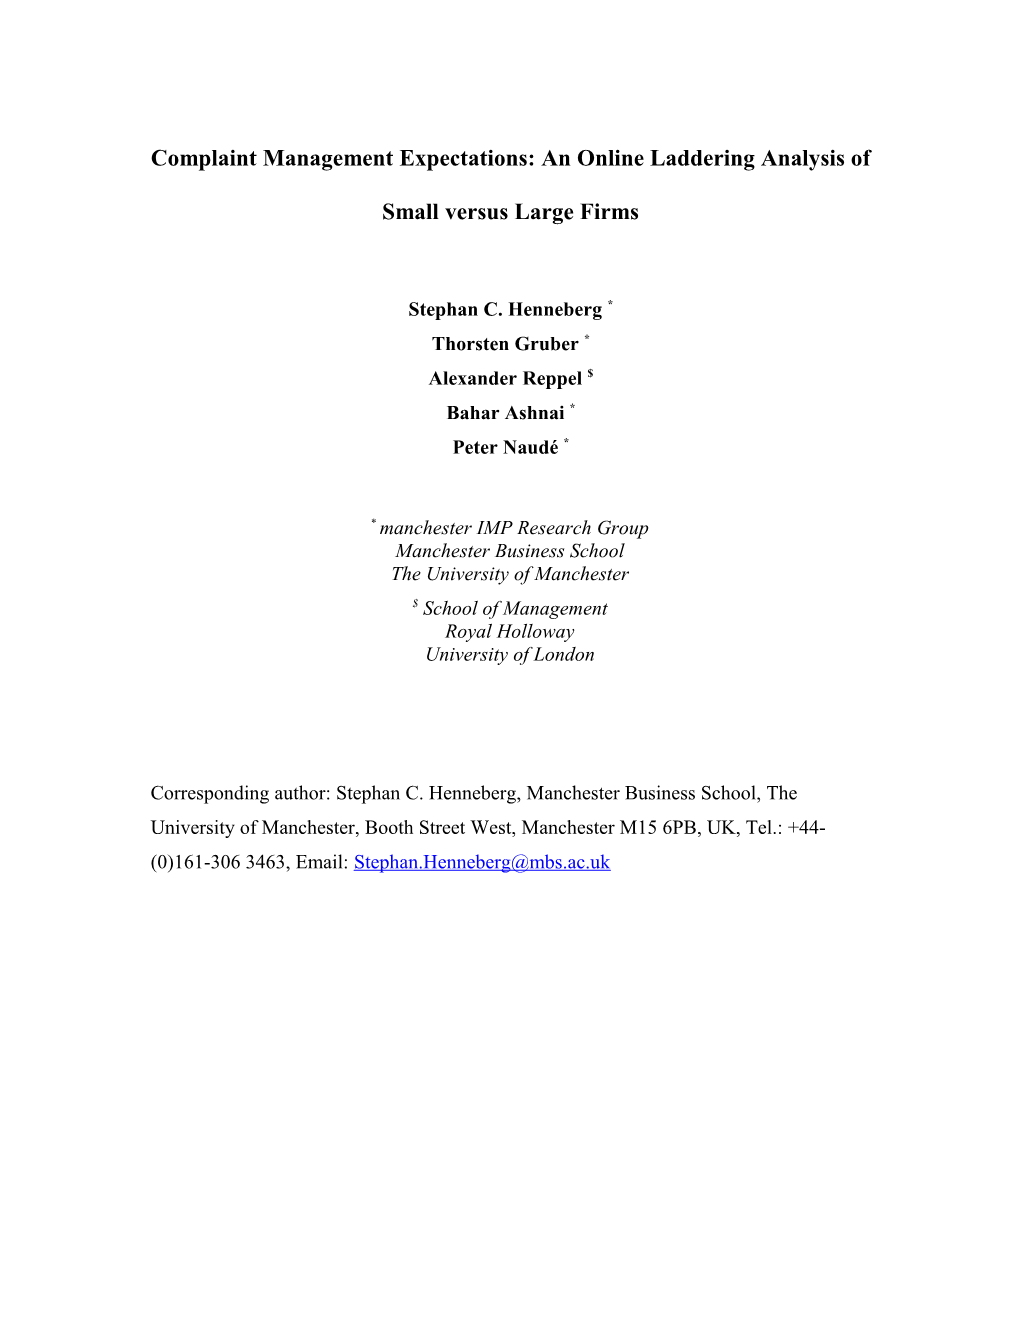 Complaint Management Expectations: an Onlineladdering Analysis of Small Versus Large Firms